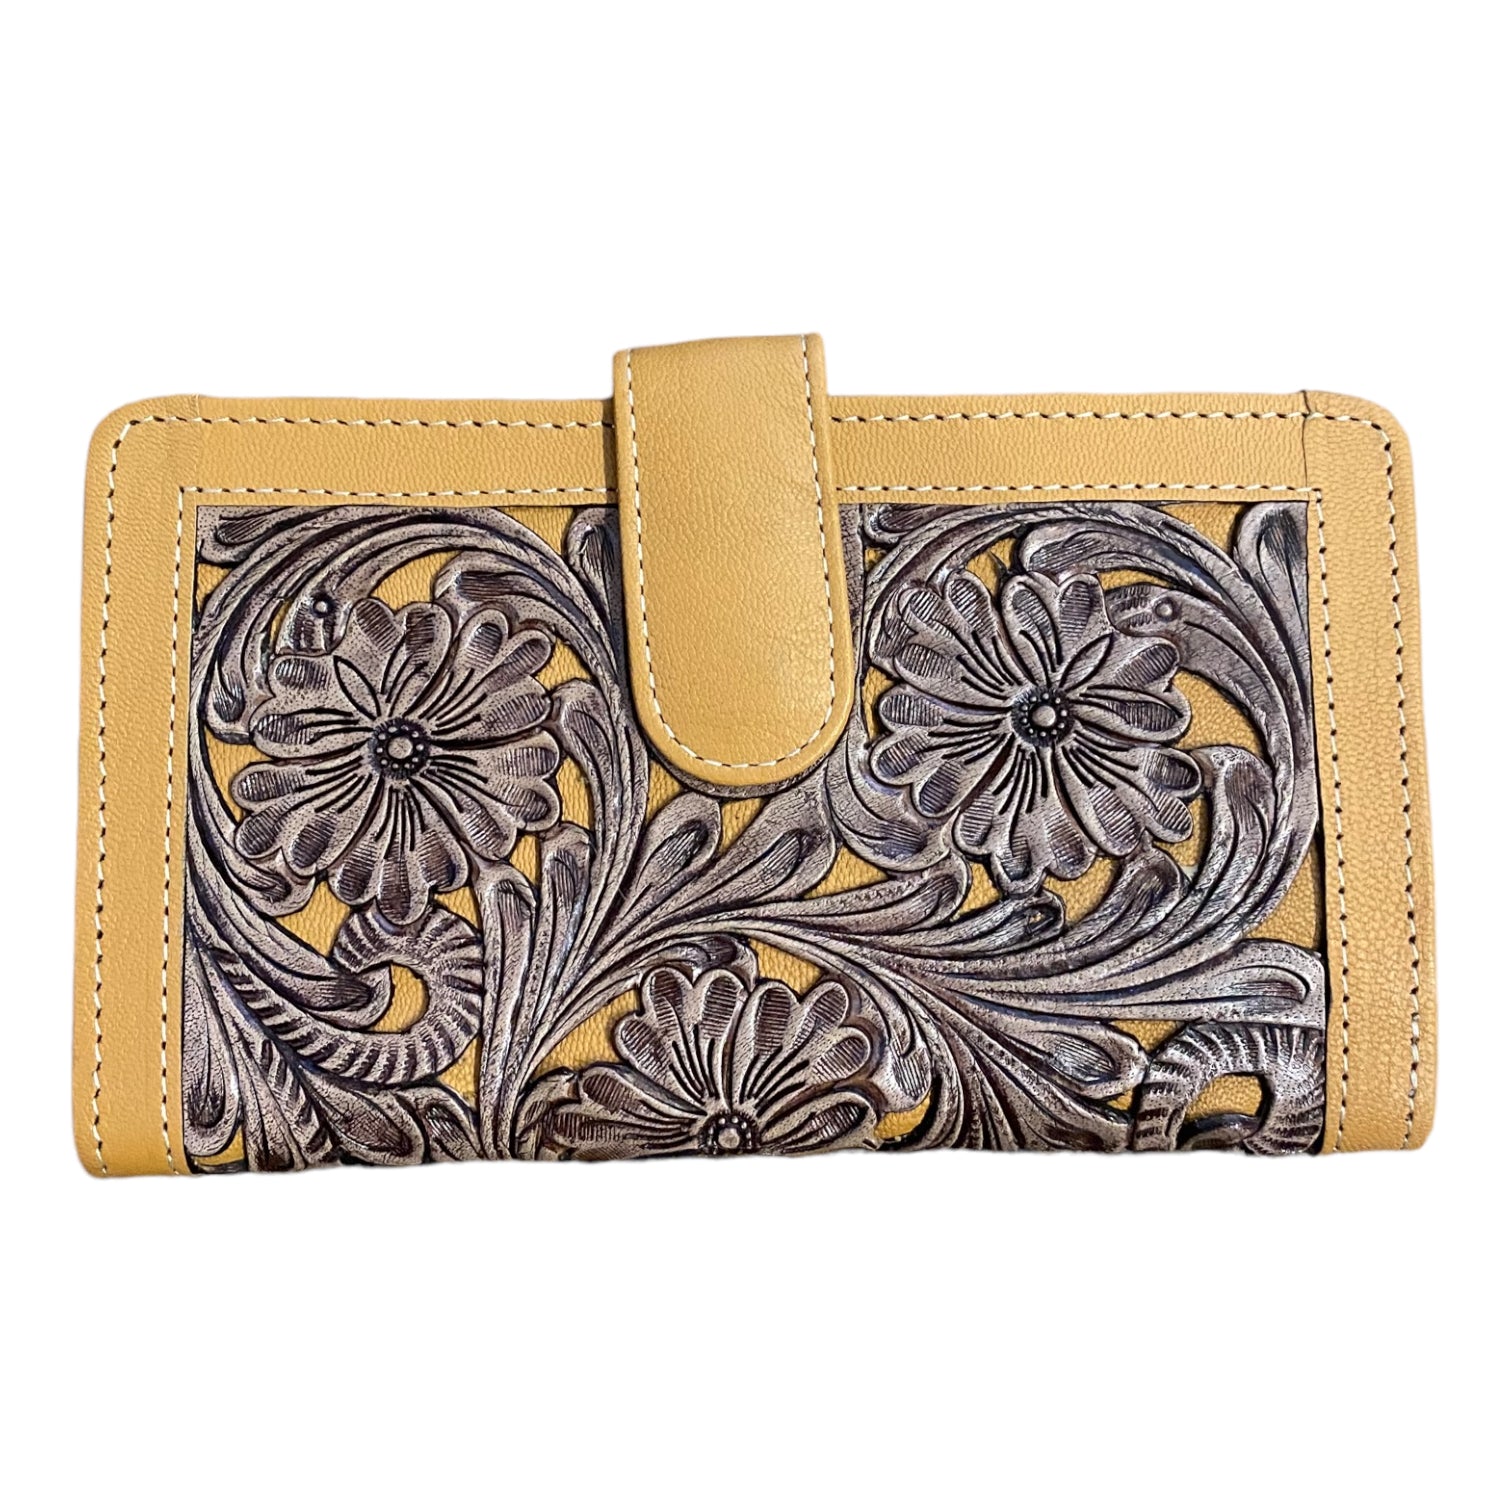 Tooled Leather Wallet - Tan